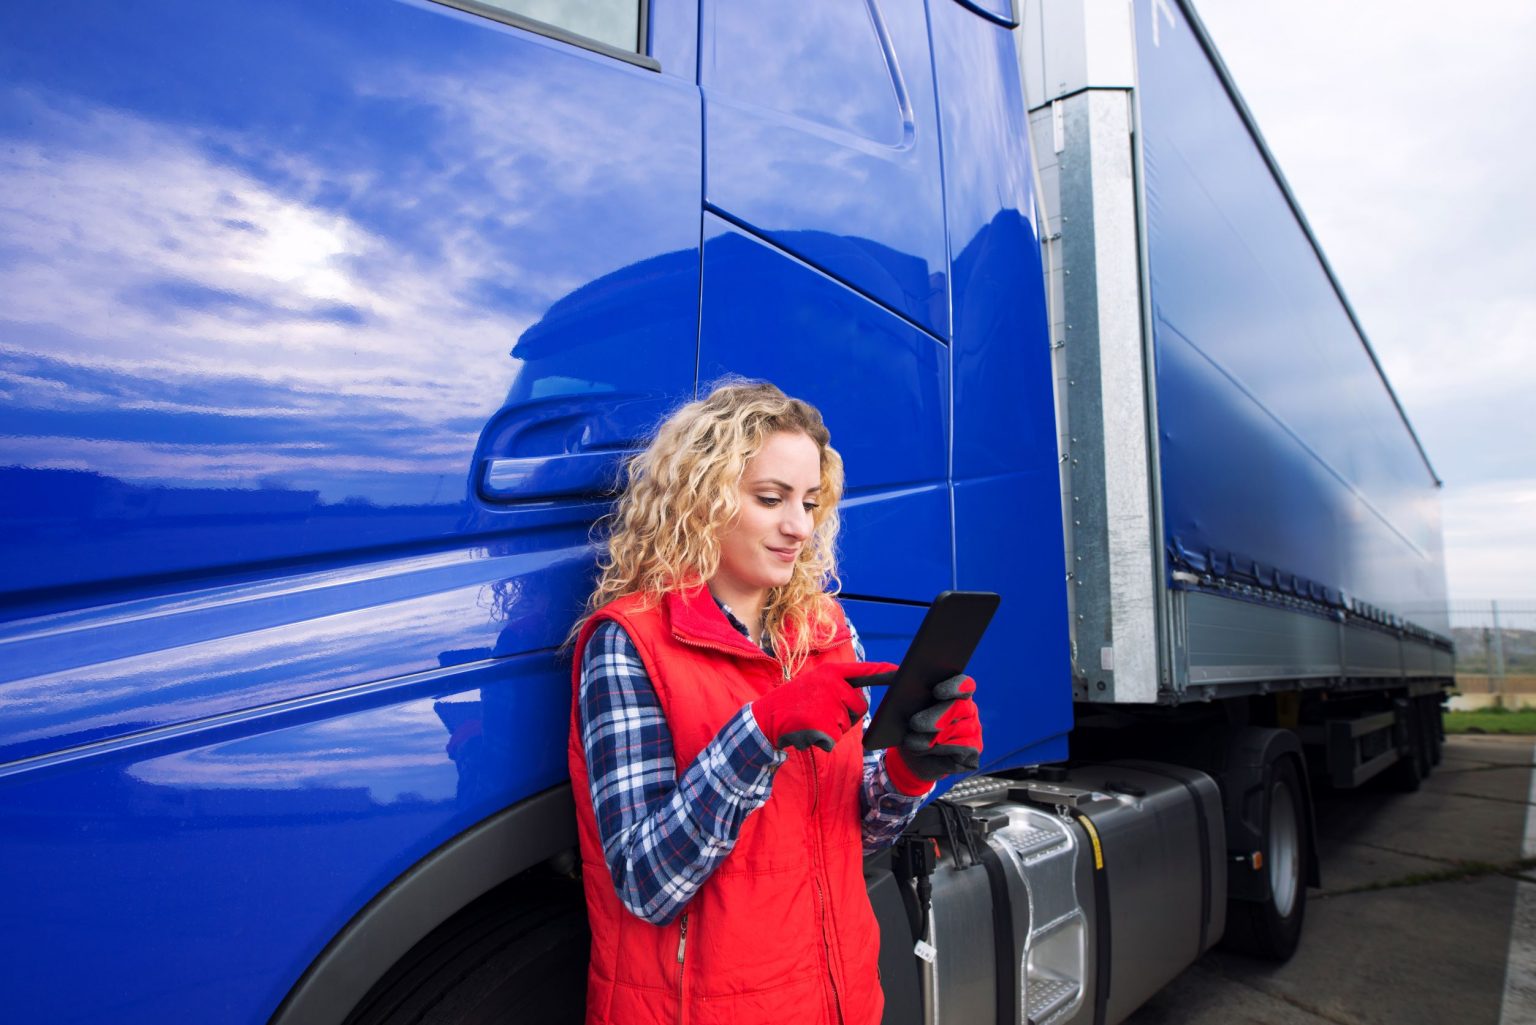 Hgv insurance for young drivers